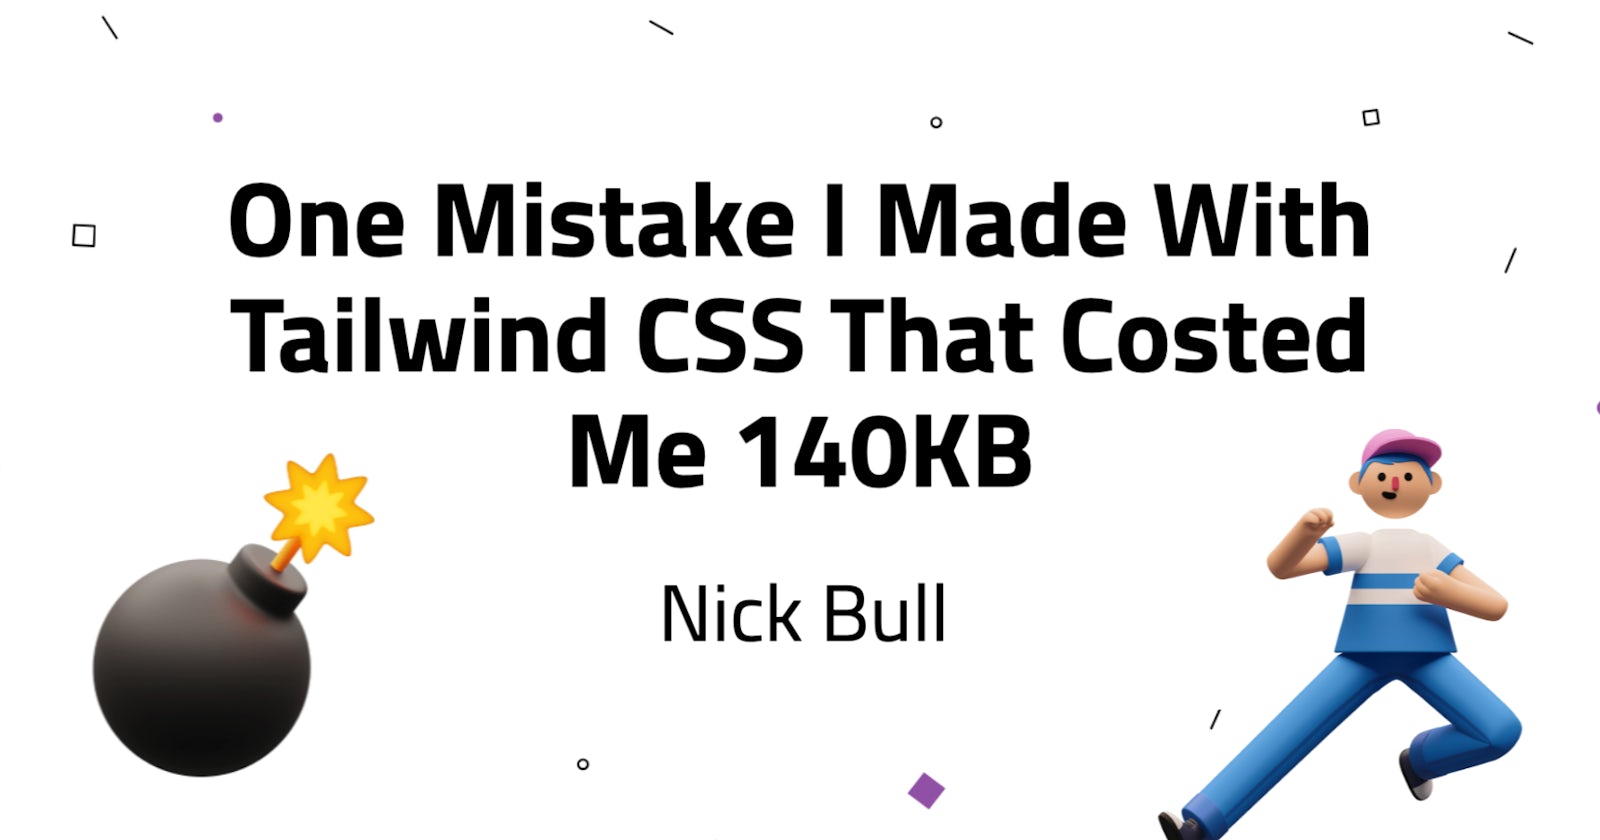 One Mistake I Made With Tailwind CSS That Costed Me 140KB